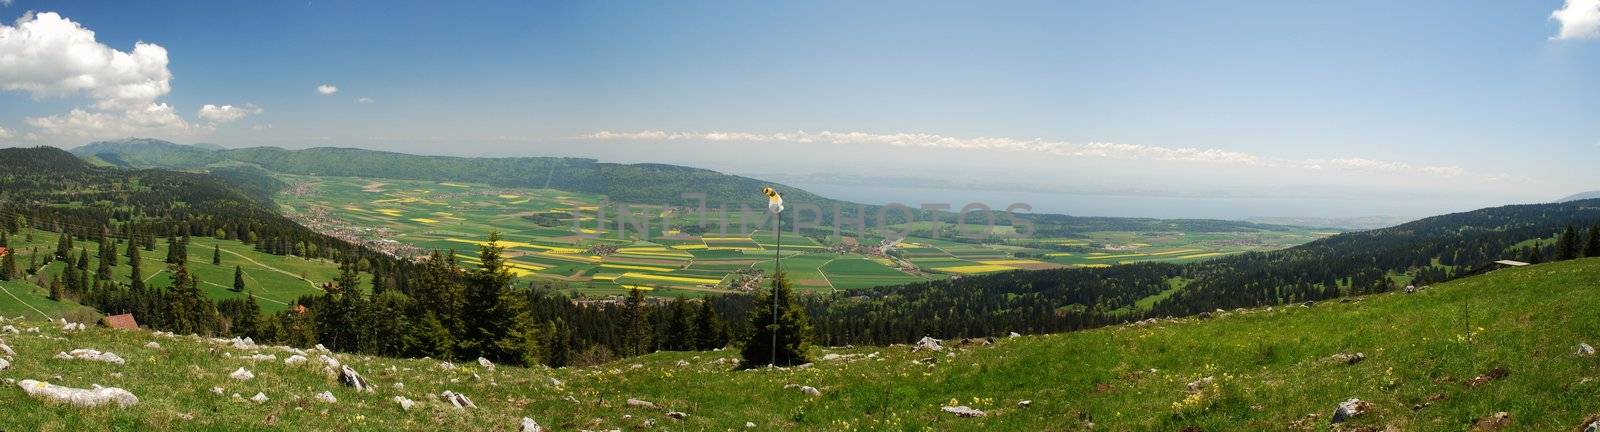 Panorama of Neuchatel region seen from Tete-de-Run hill, there is a weather-clock foreground, Jura woods coming down. In the plane of Ruz Valley there are yellow and green coloured fields, at right side we can see Neuchatel lake, just above there 